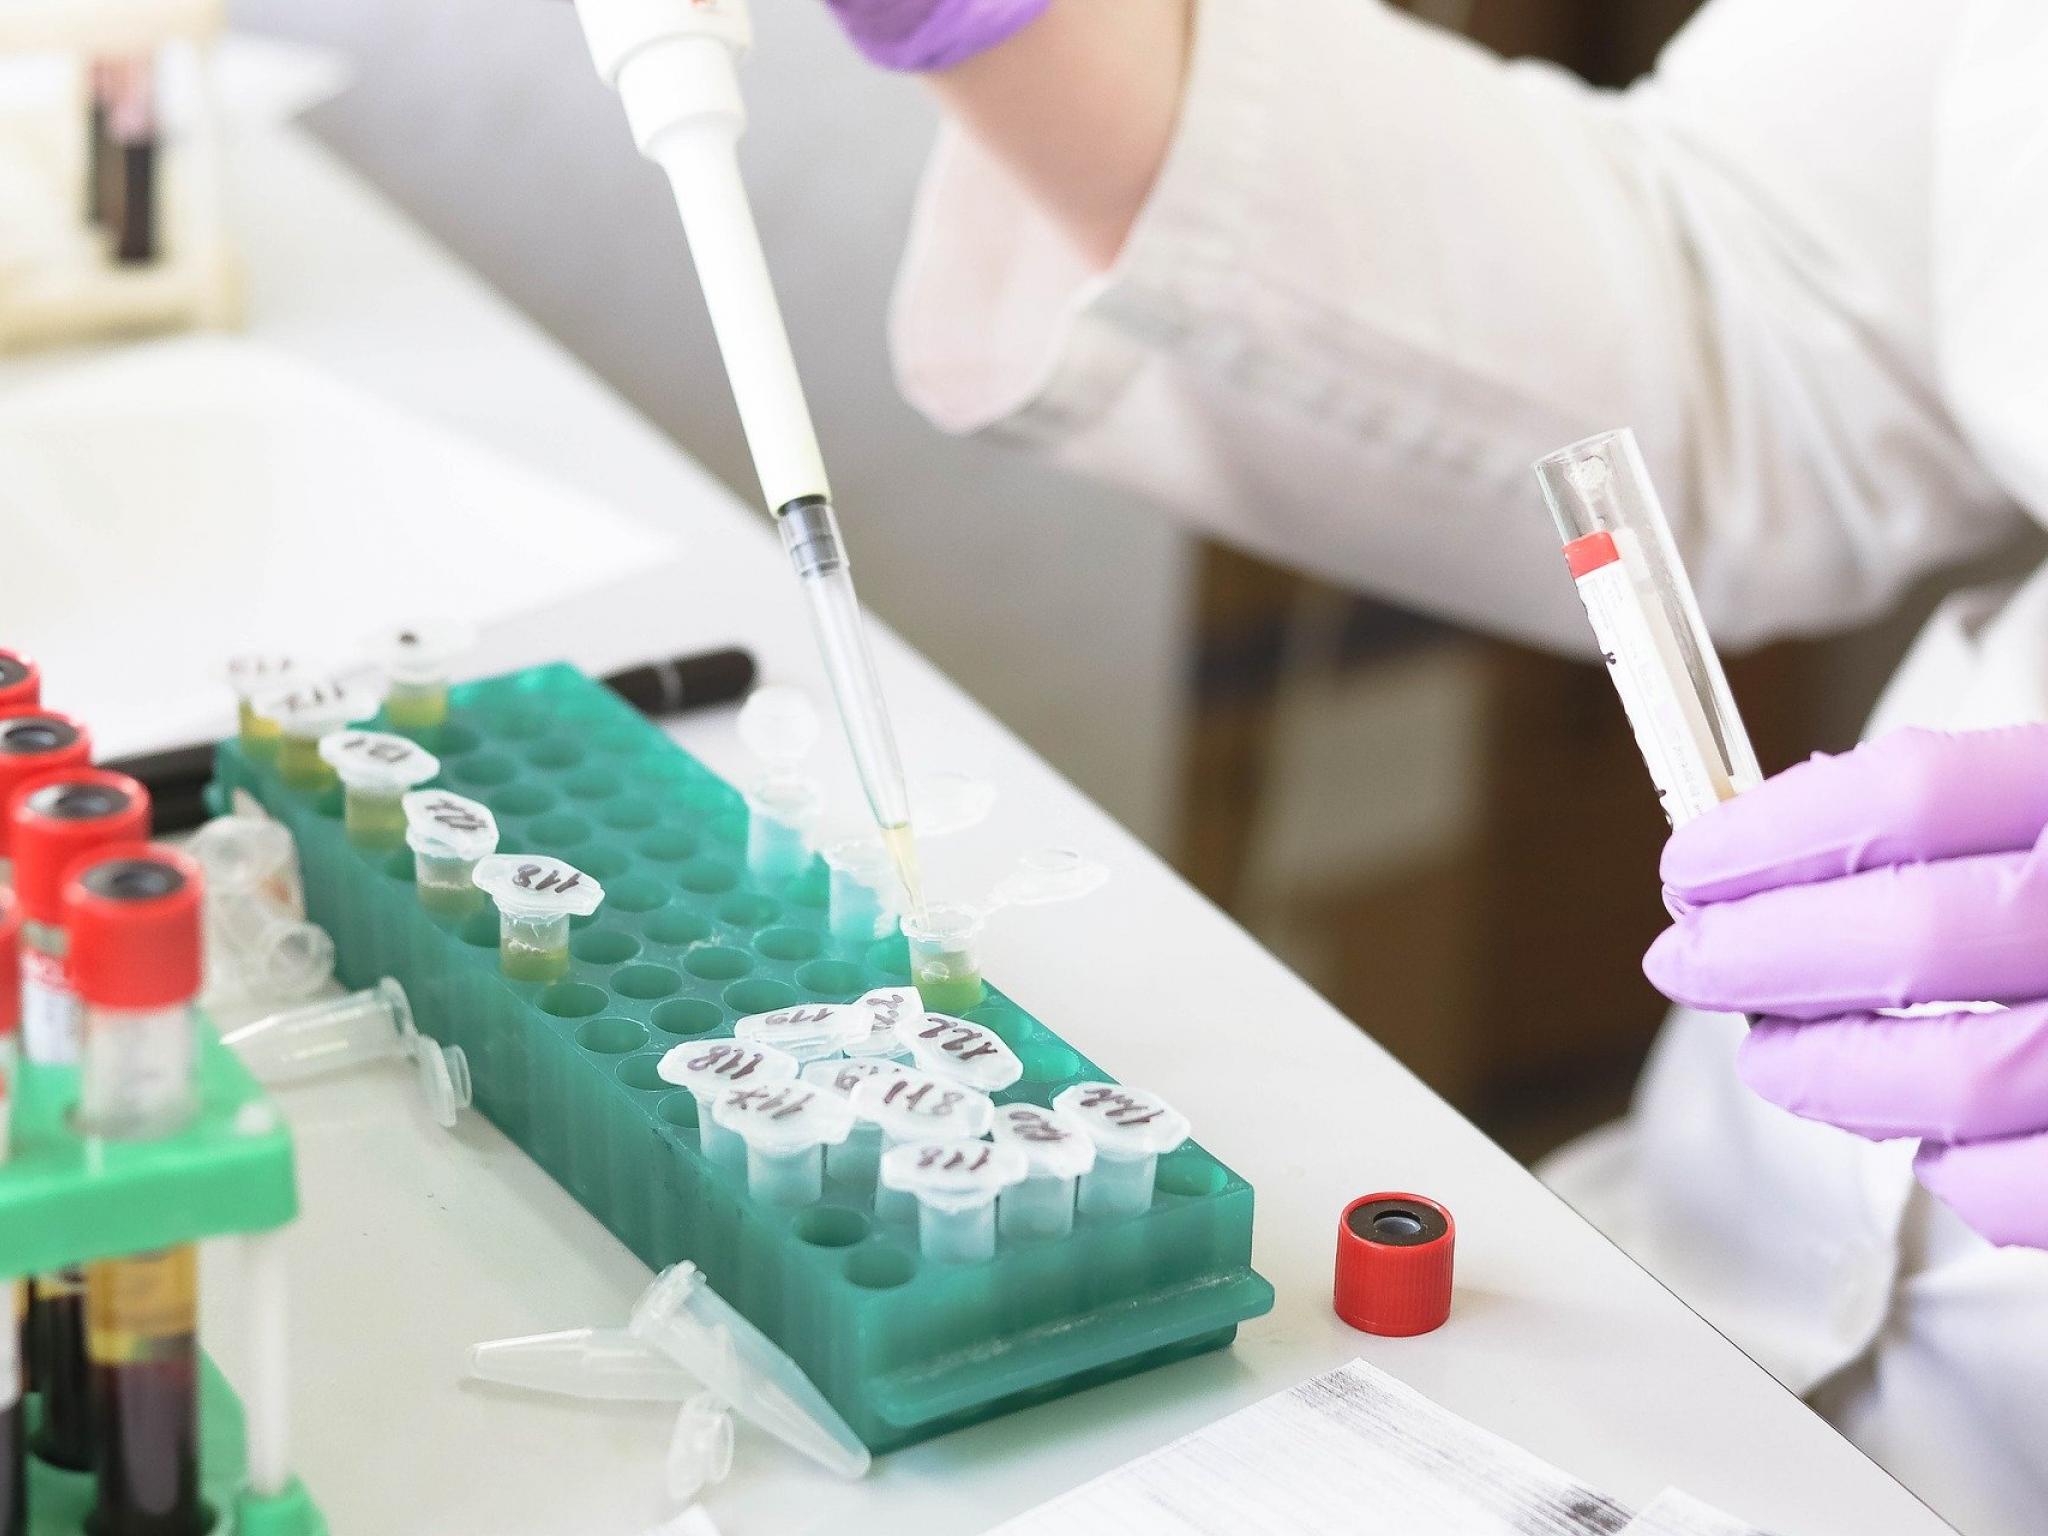  lab-developed-tests-under-fda-scrutiny-what-it-means-for-startups 